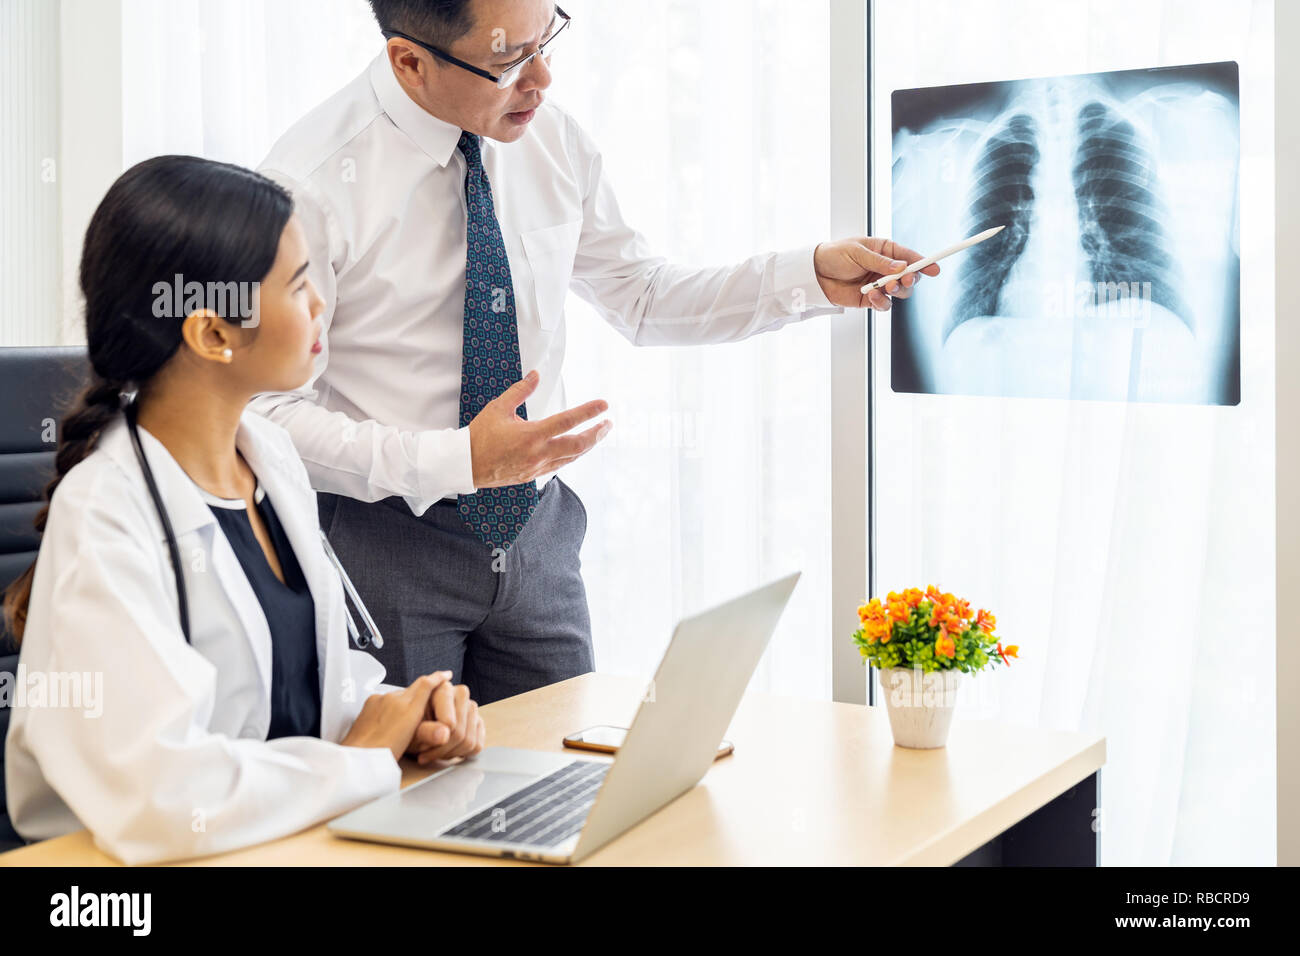 Professional doctors discussion about x-ray result in medical office hospital Stock Photo